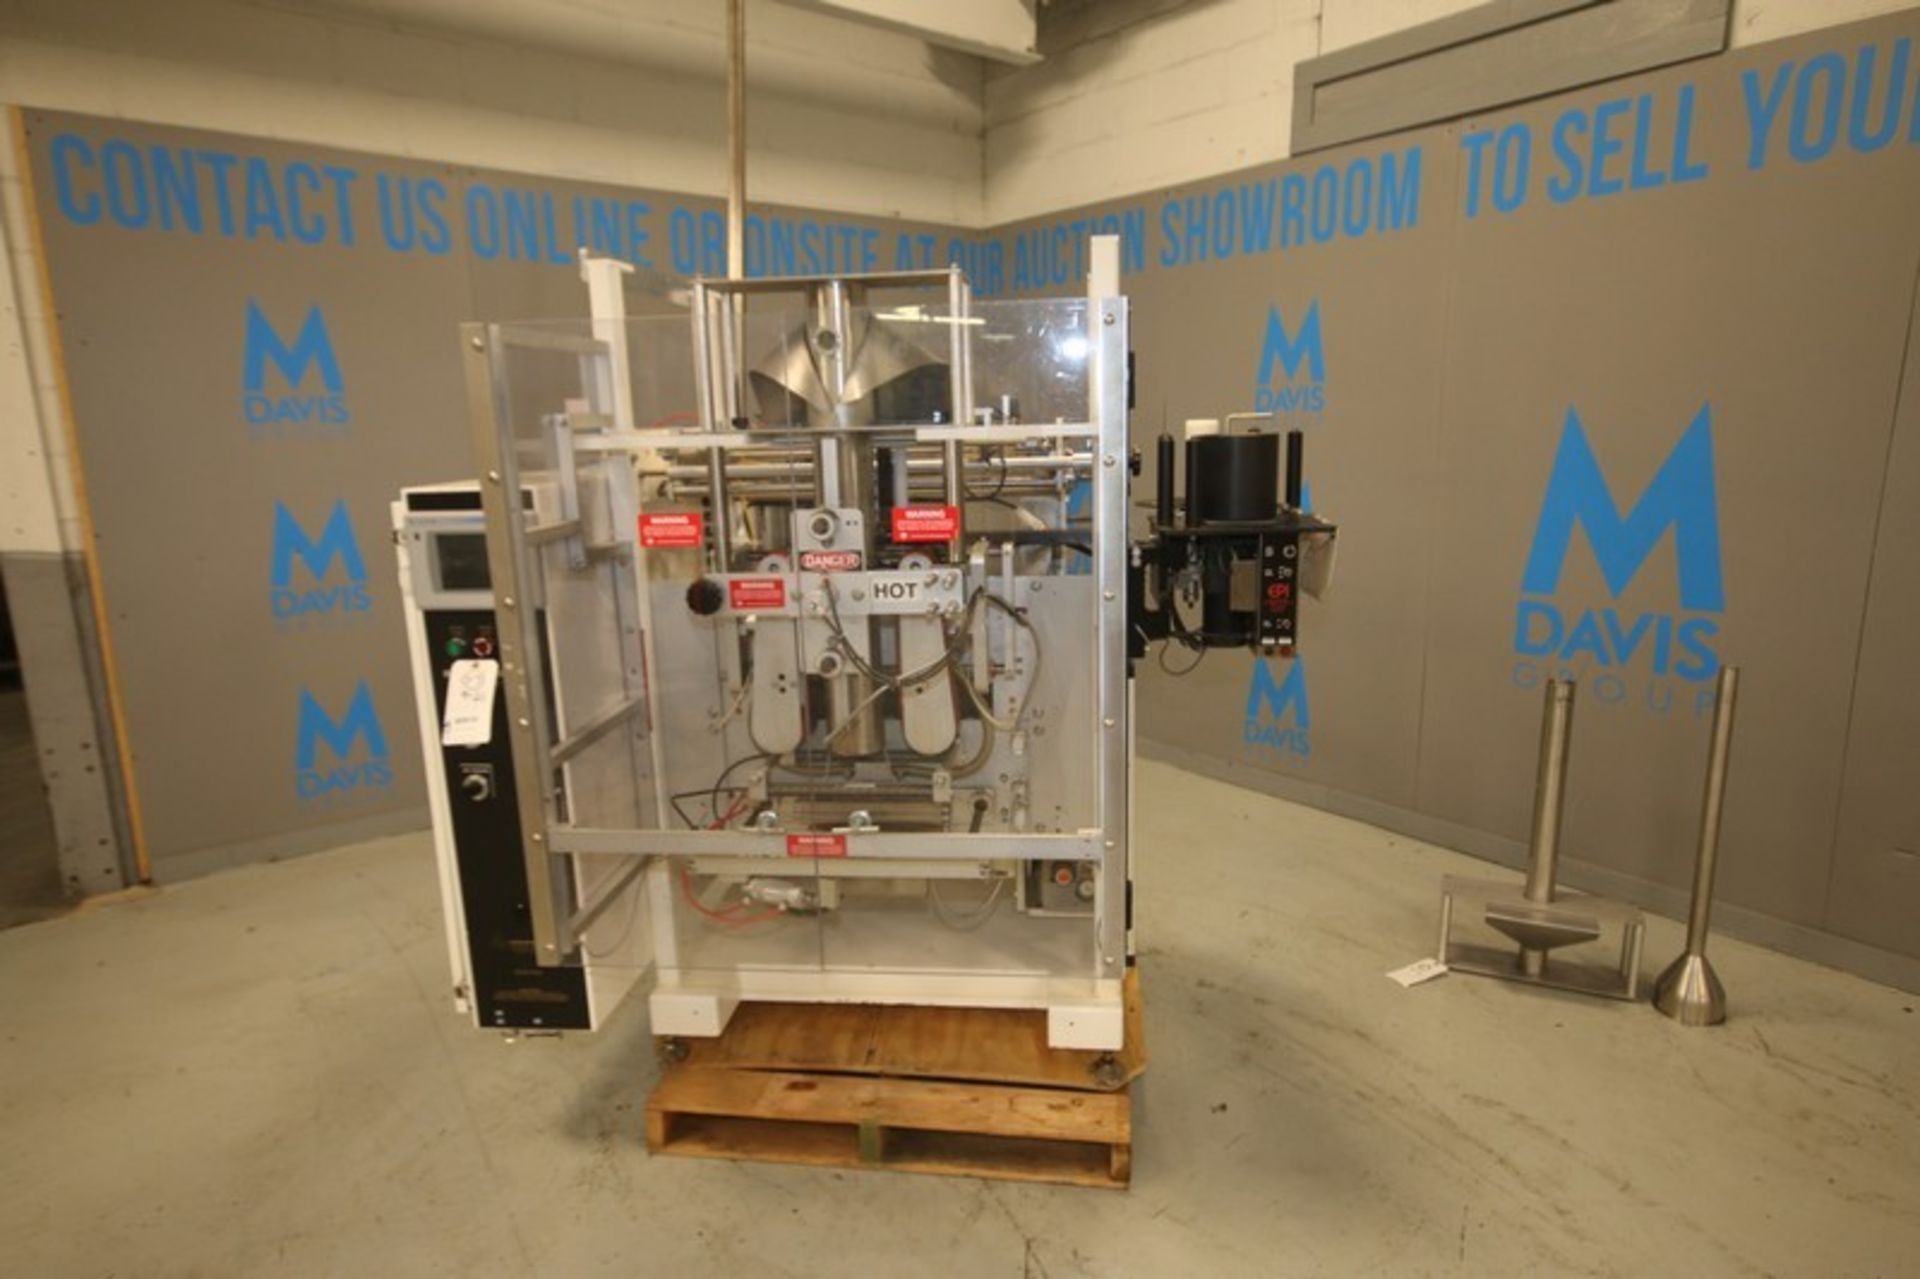 Universal Packaging Vertical Form Fill & Seal Packaging Machine (VFFS), Model S2000C, SN 1709,